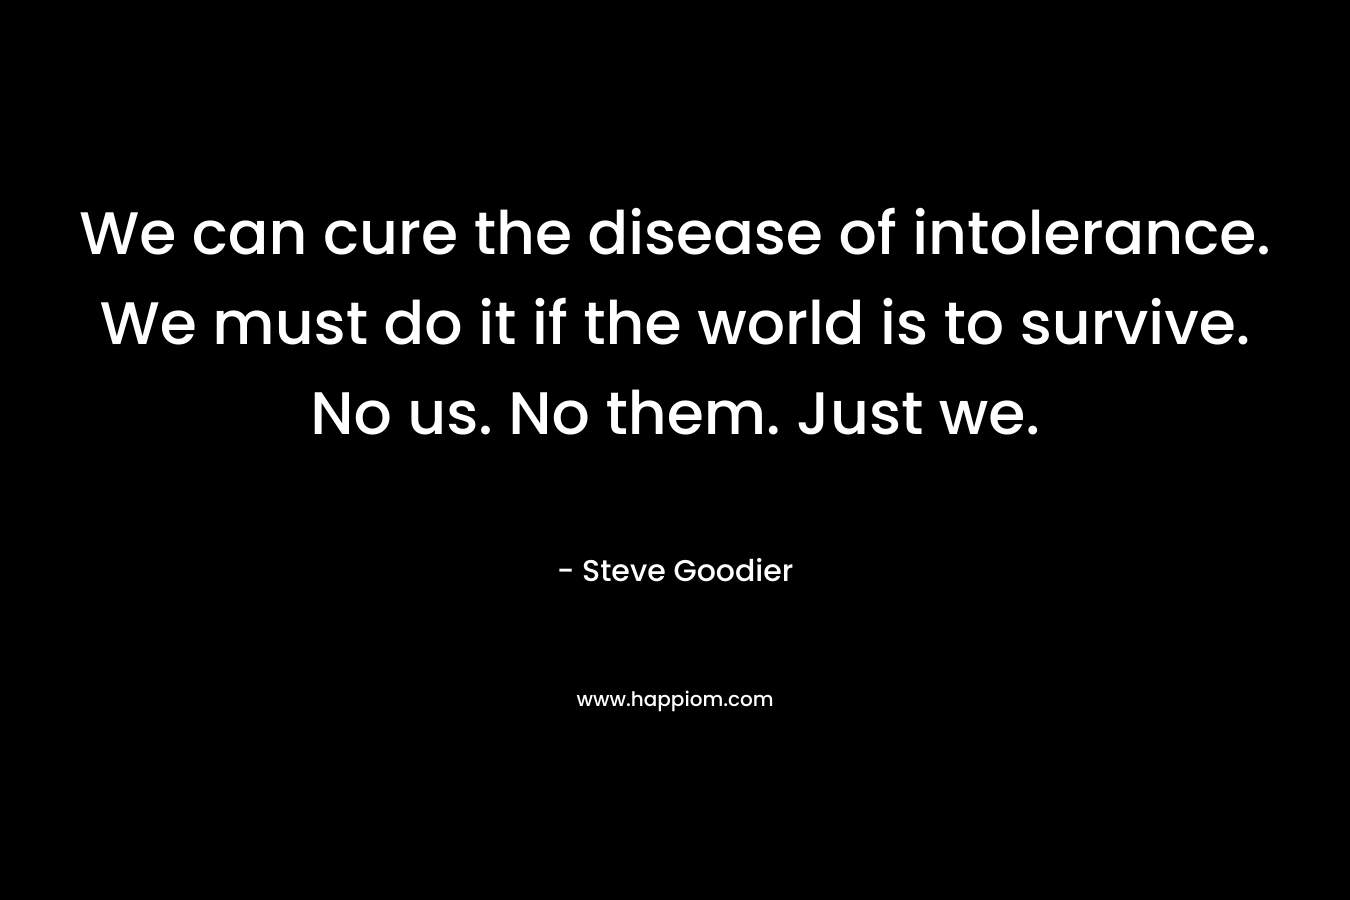 We can cure the disease of intolerance. We must do it if the world is to survive. No us. No them. Just we. – Steve Goodier